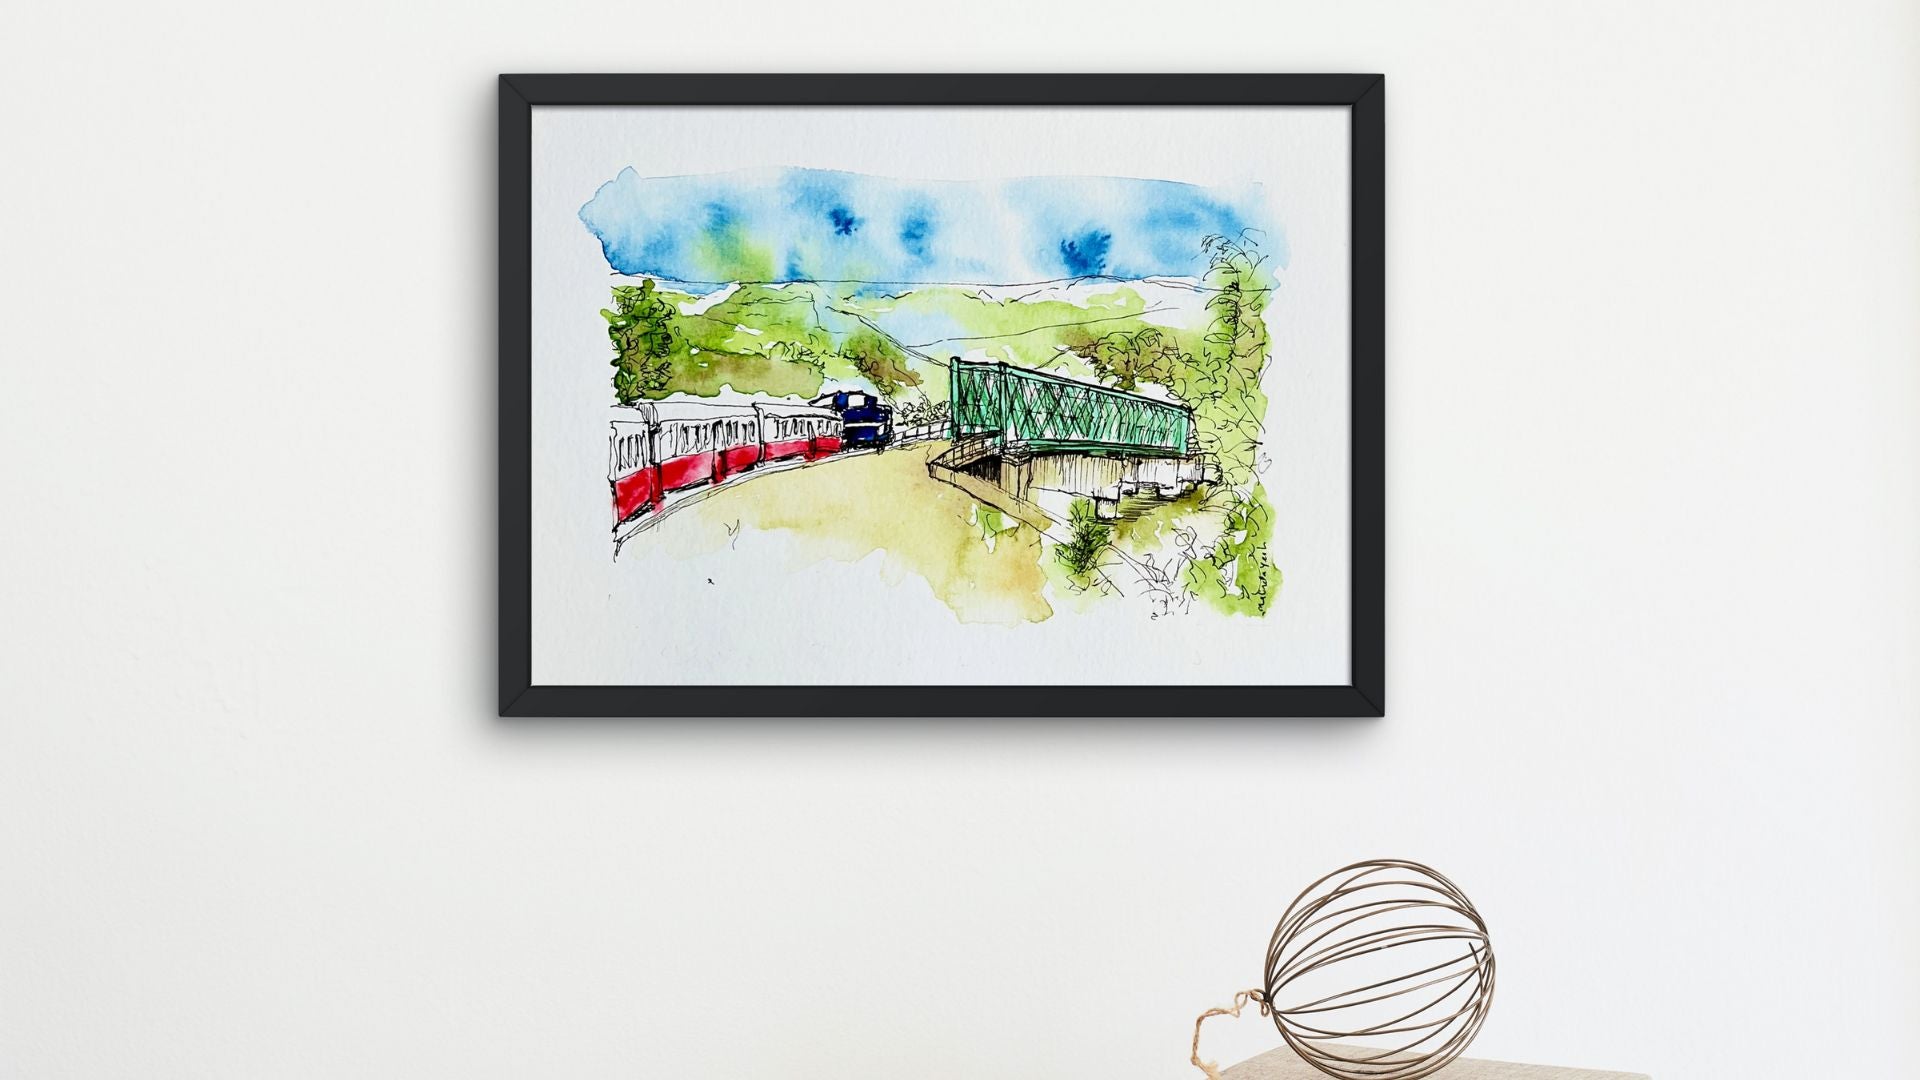 Framed loose watercolour and ink artwork for travel art commission. Artwork of Douro Railway Line, Portugal 